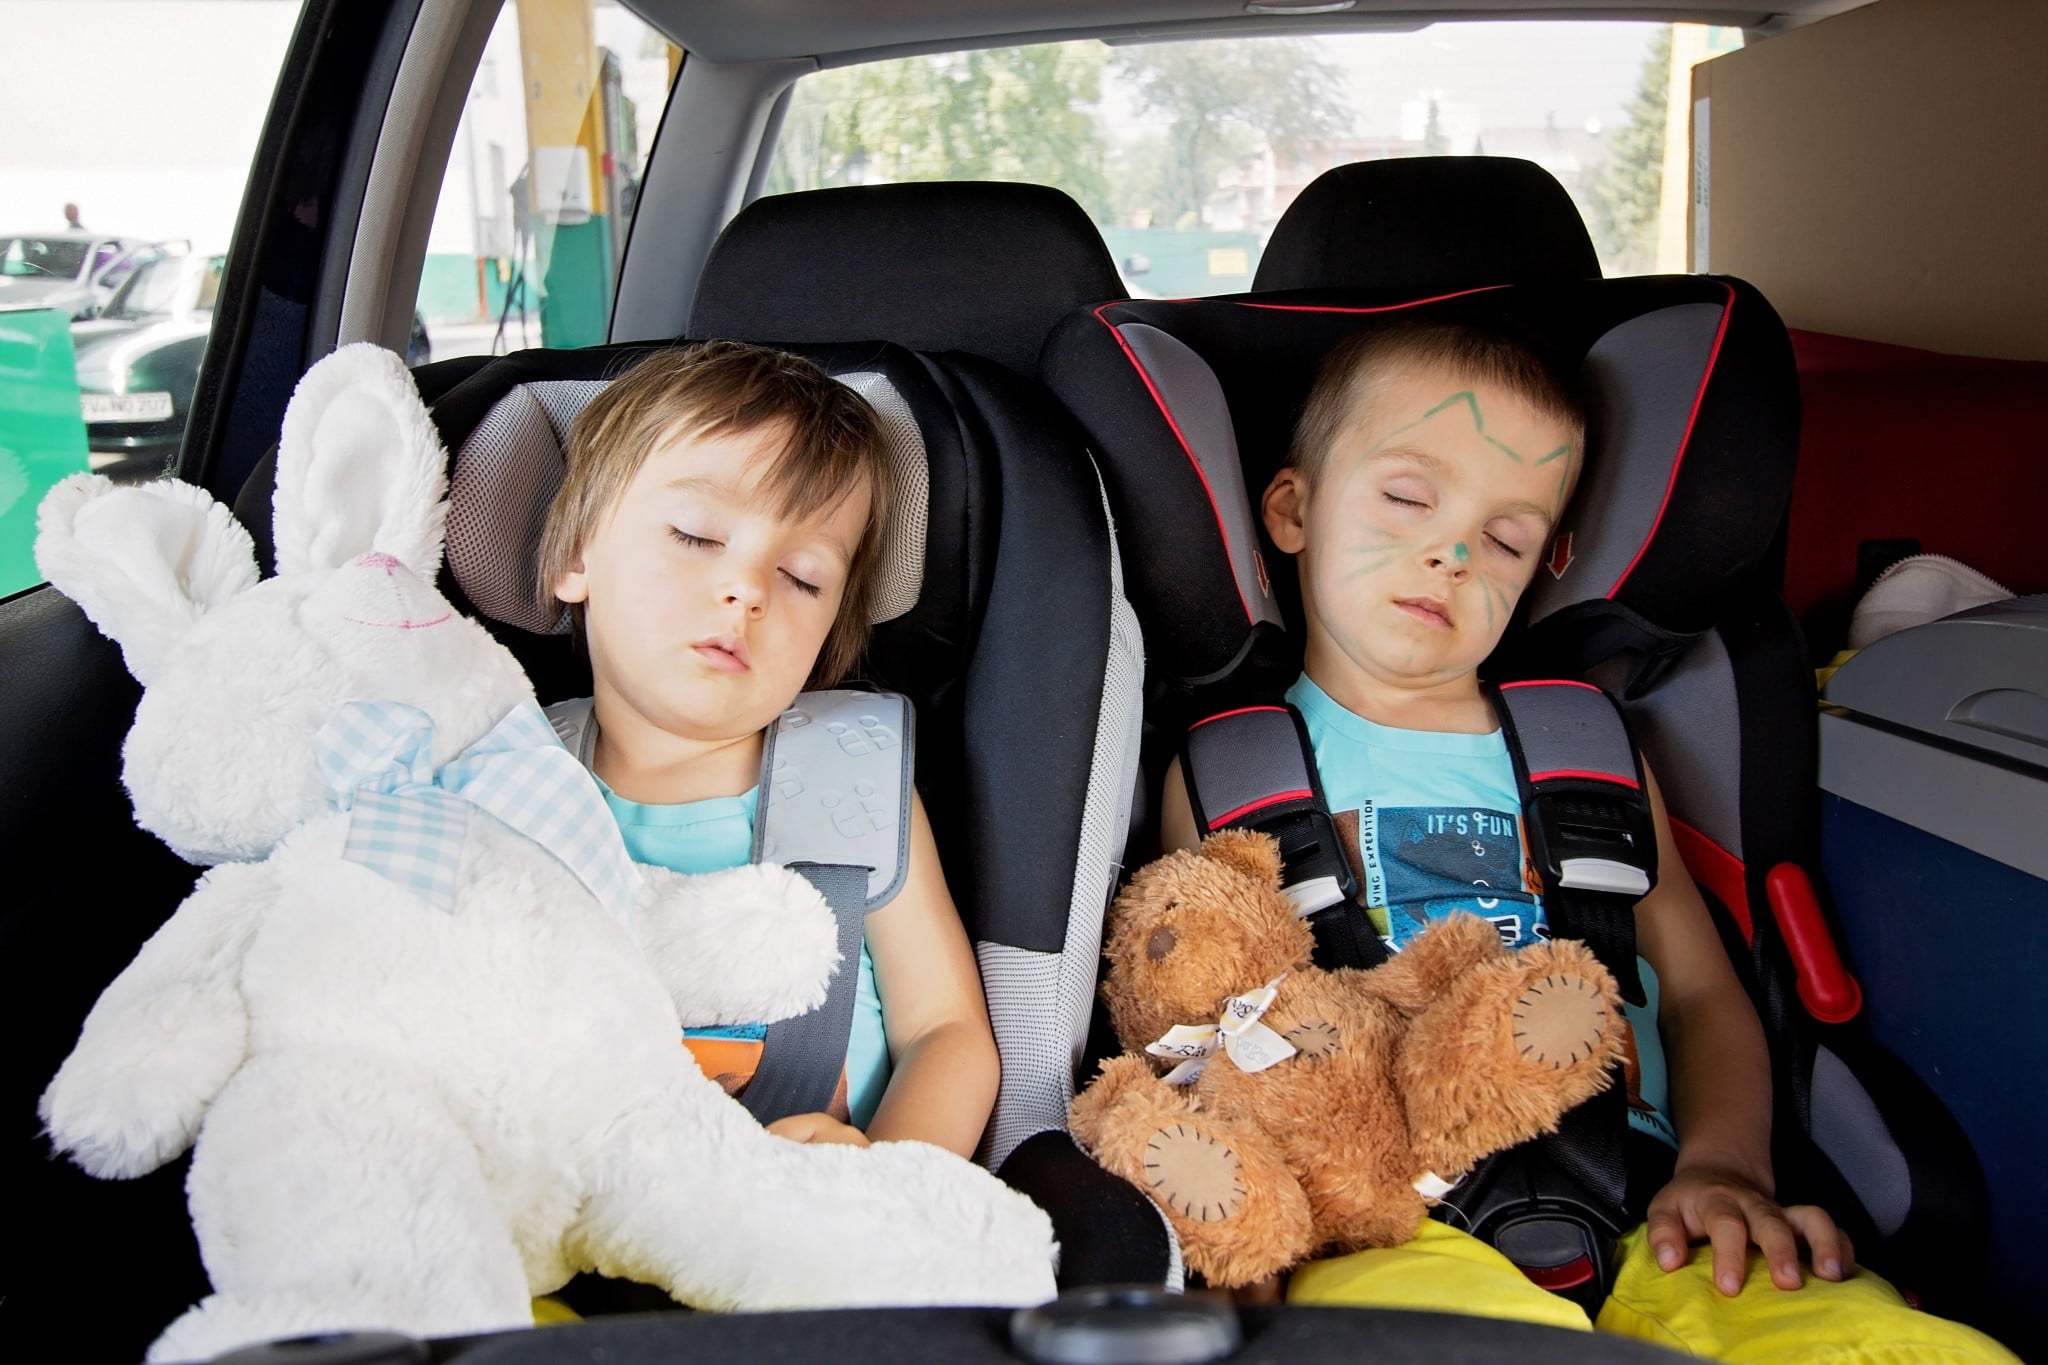 sedating antihistamines: two boys asleep in the back seat of a car